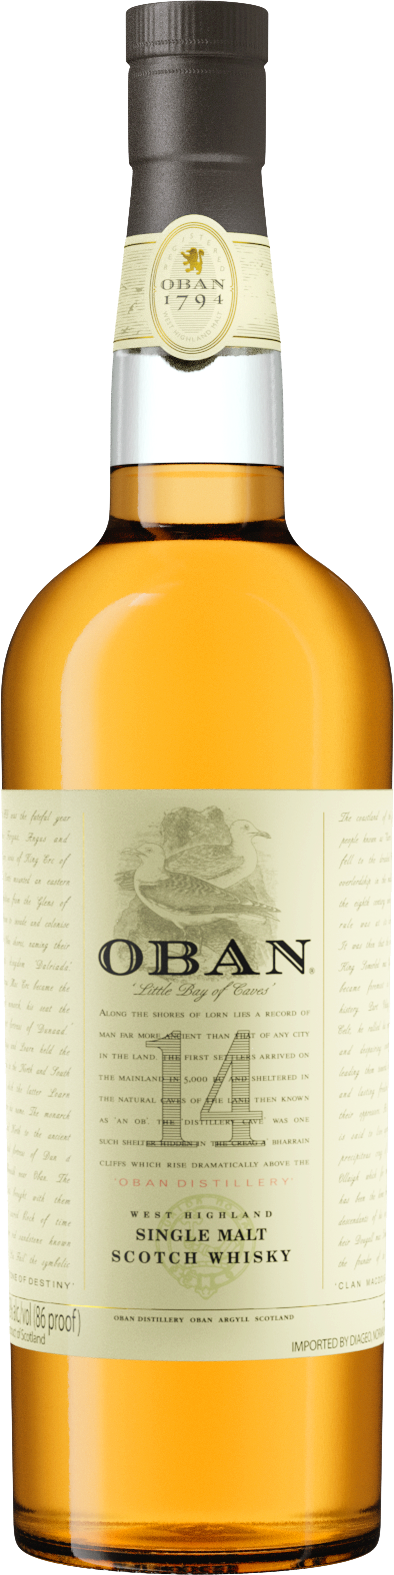 OBAN 14 YEARS OLD